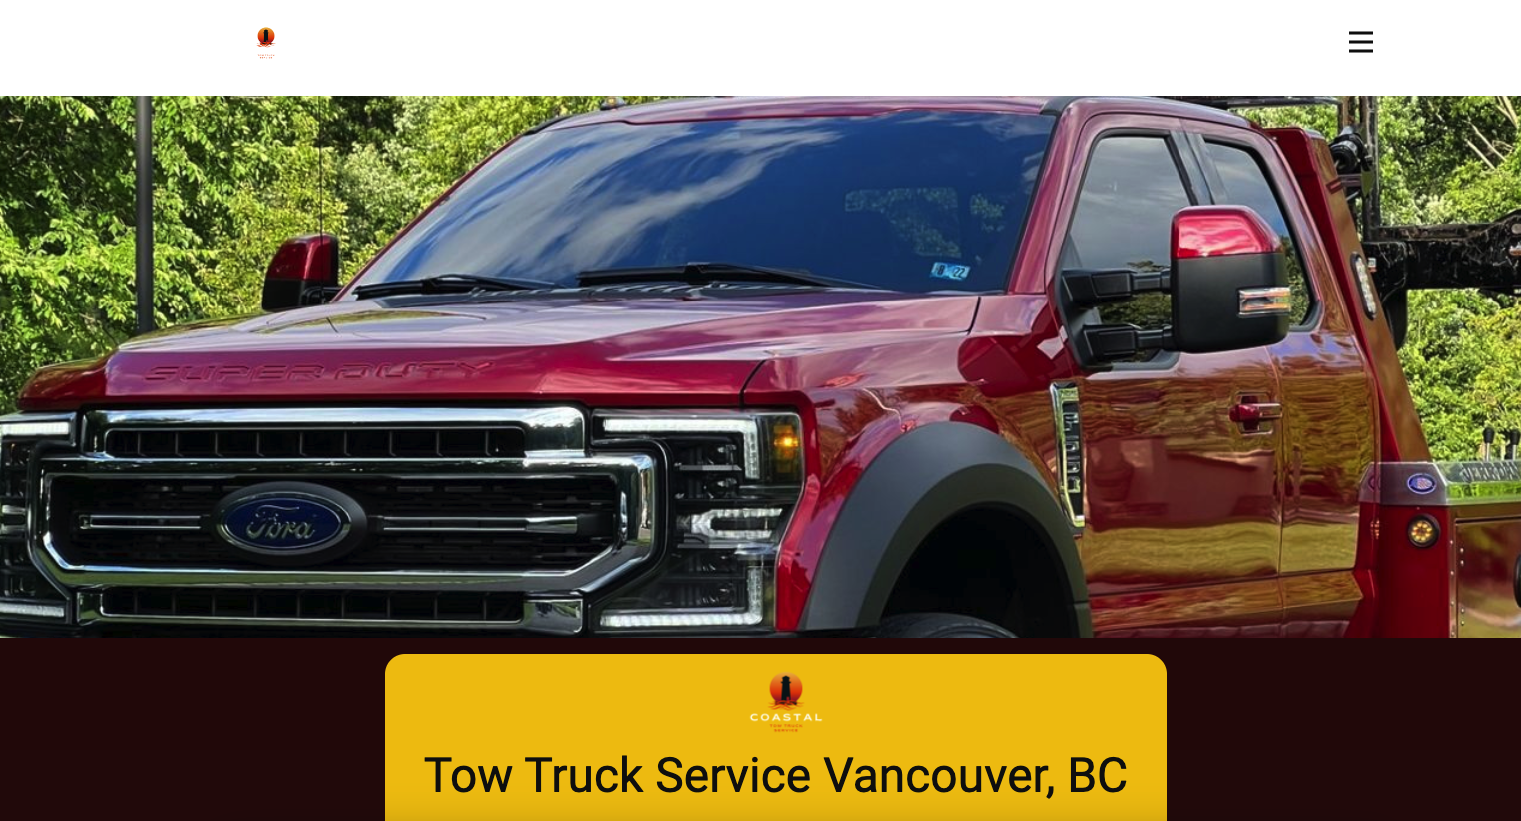 Coastal Tow Truck Service - #3 Best Towing Company In Vancouver 